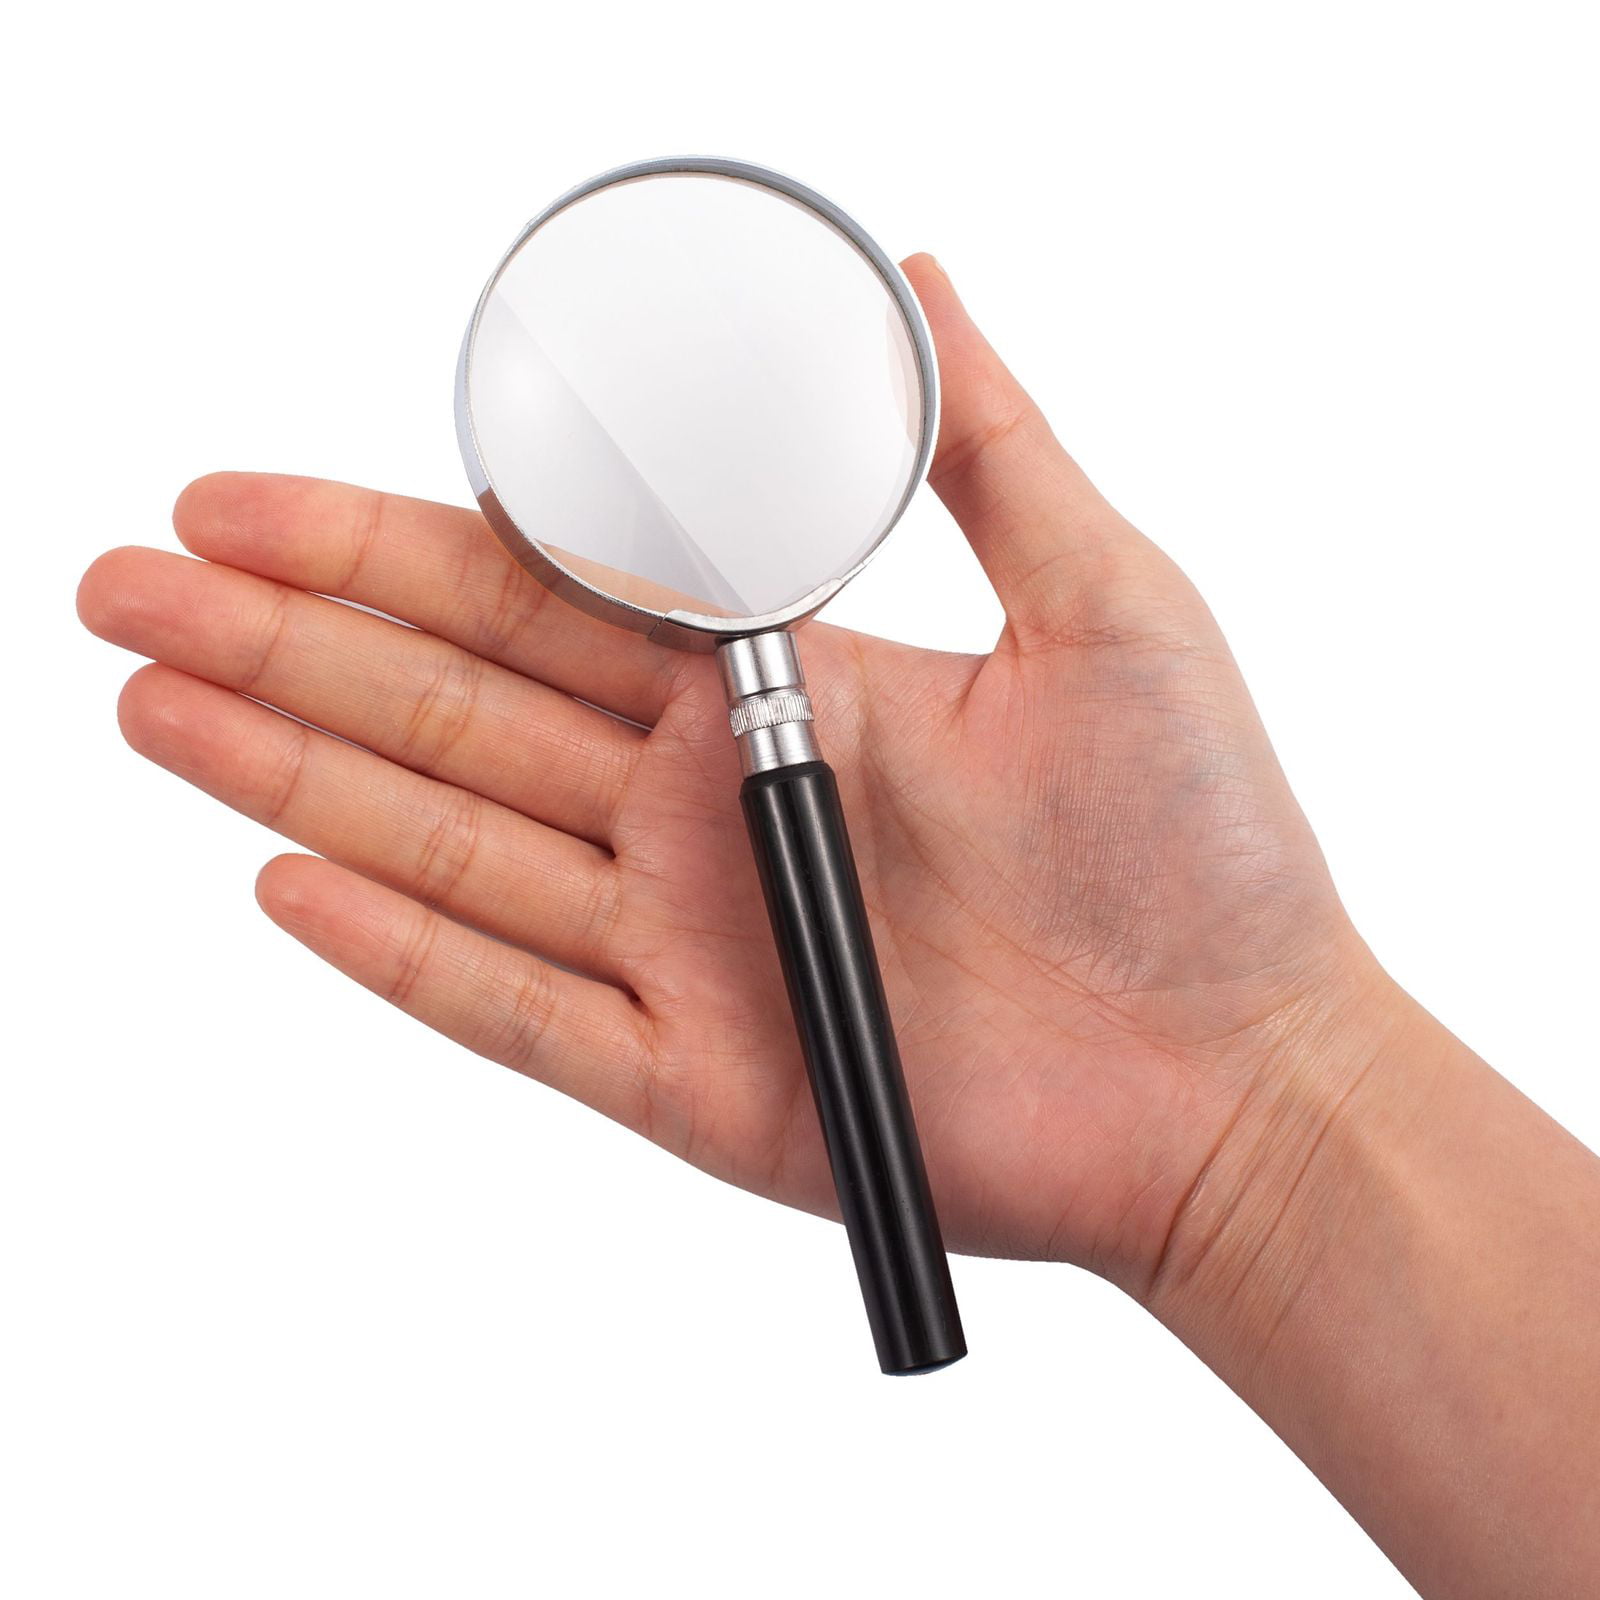 AXZHYX Hand-held Magnifier Portable 10 Times Magnifying Glass Jewelry Antique Appraisal